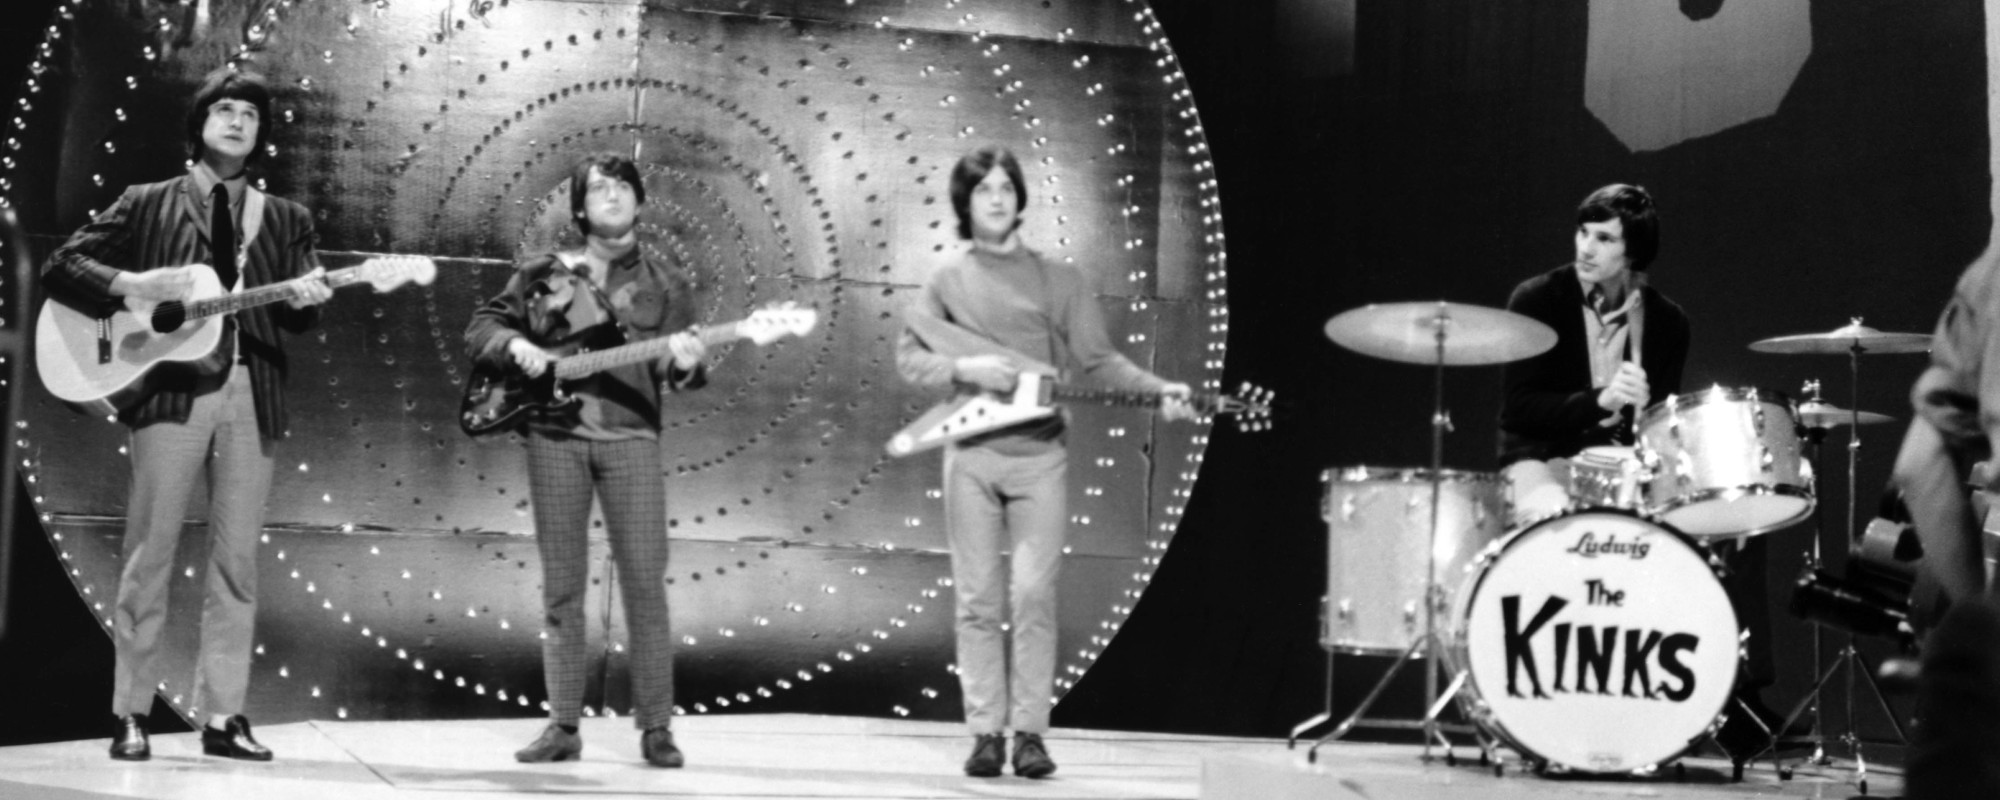 Behind the Song “All Day and All of the Night” by The Kinks and Why Their Record Label Initially Rejected It